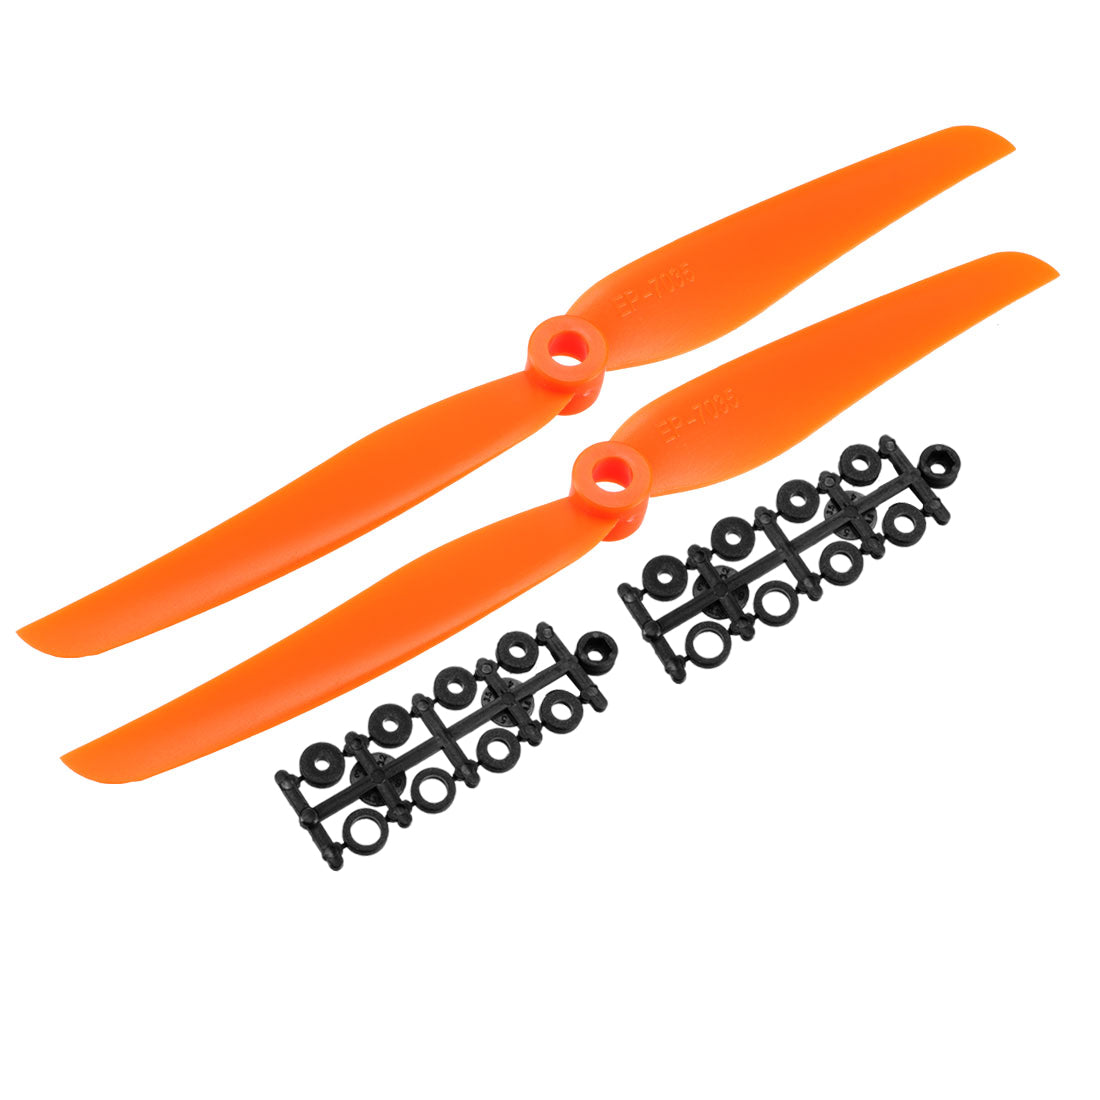 uxcell Uxcell RC Propellers  7035 7x3.5 Inch 2-Vane Fixed-Wing for Airplane Toy, Nylon Orange 2pcs with Adapter Rings